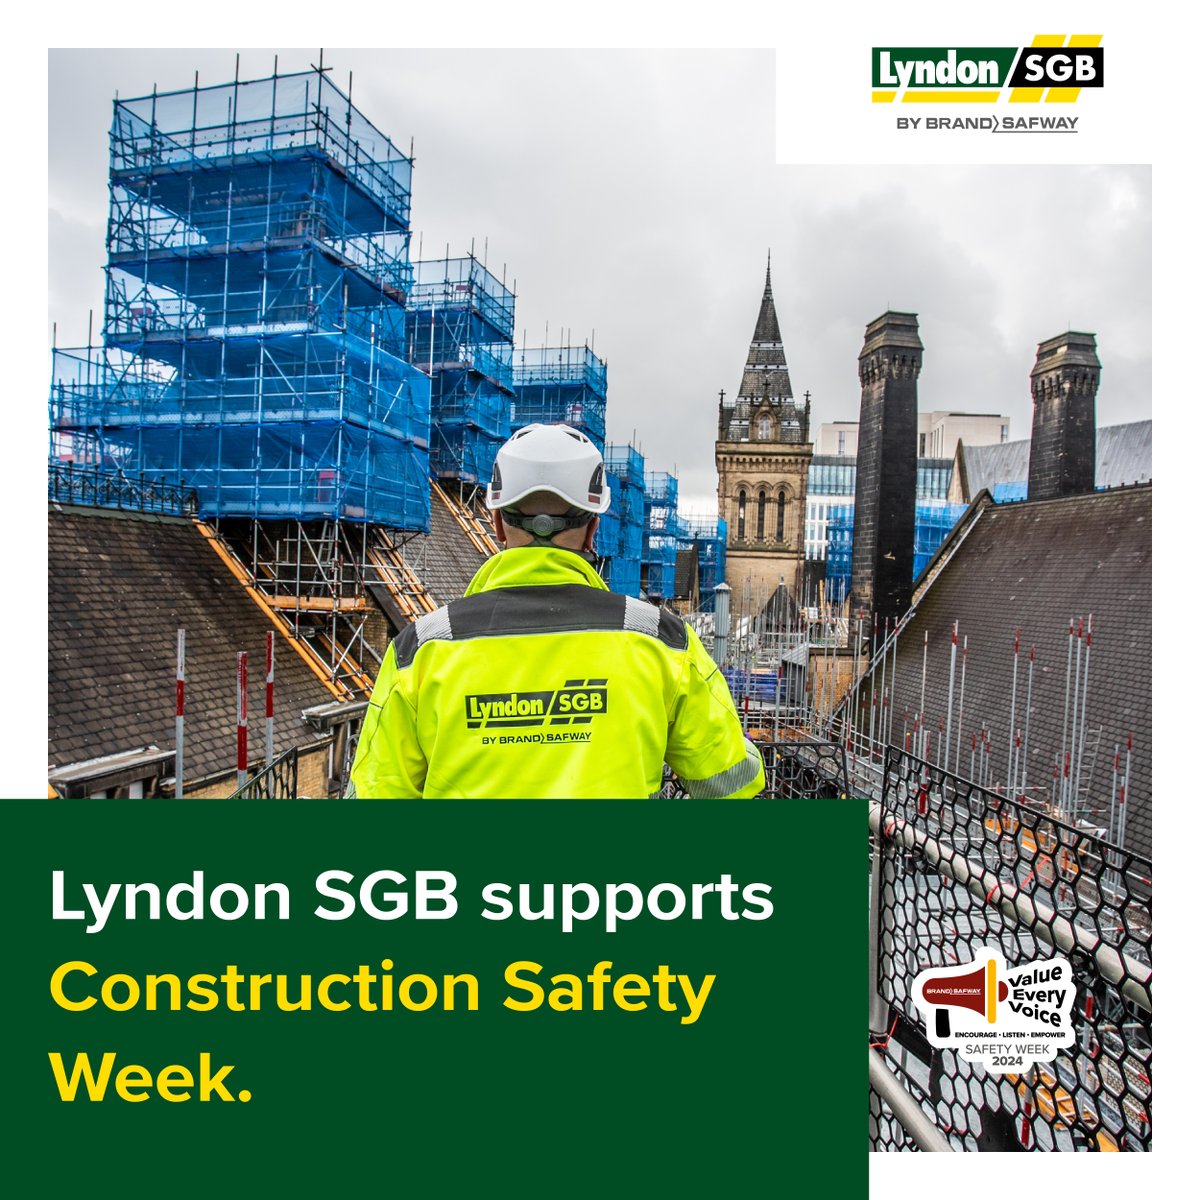 It's @SafetyWeek_2024 & #Lyndon SGB is mobilising the whole 1,000+ strong business – as we #ValueEveryVoice 👷🏻‍♂️ We are founded on #safety ‼️ We #DontWalkBy 🙈 We listen👂🏻 We care for #mentalhealth 🧠 We support #constructionsafetyweek 🦺 #WeAreOne #MoreSafety #MoreProductivity